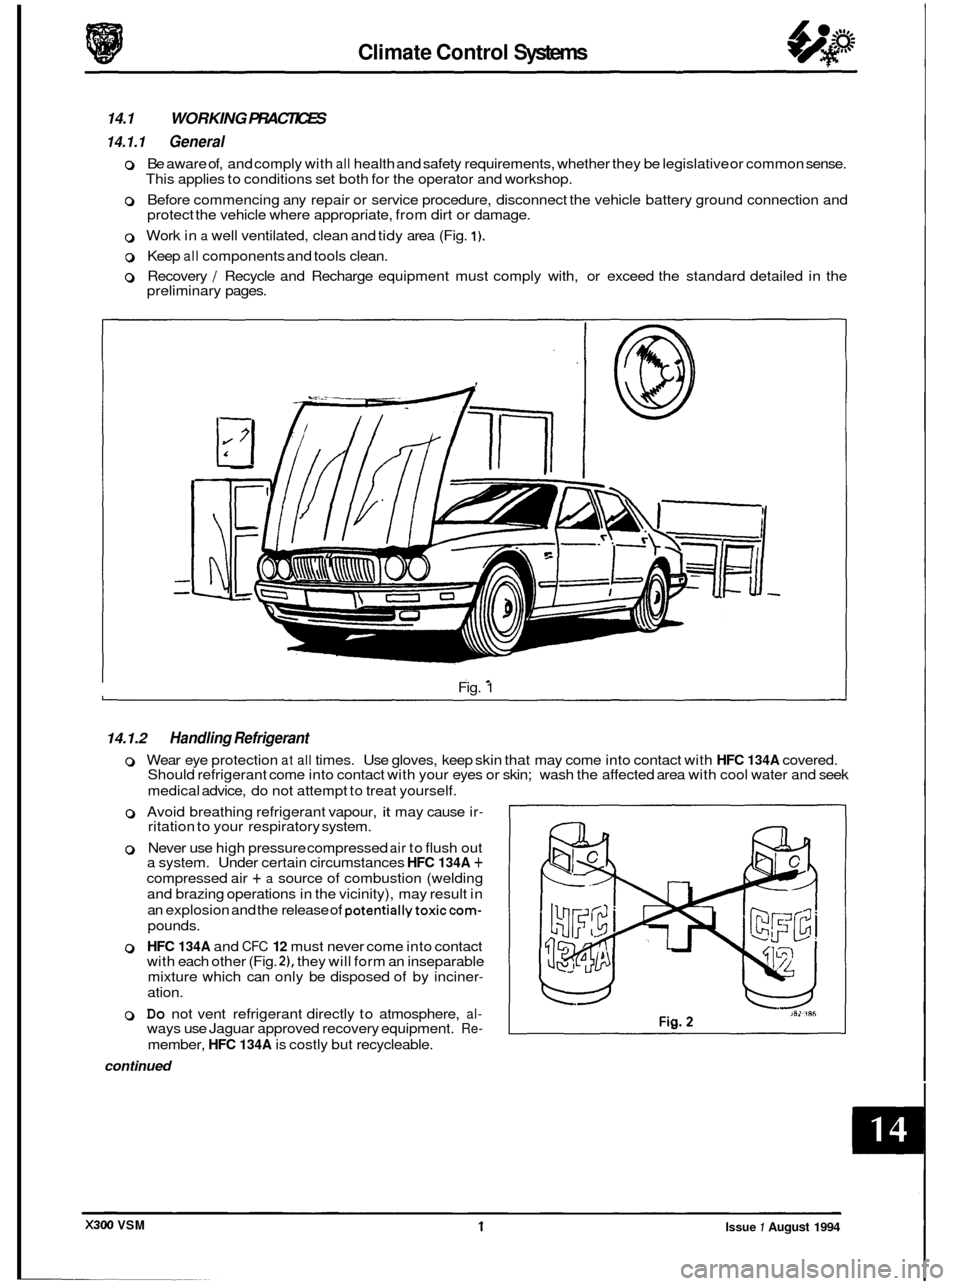 JAGUAR XJ6 1994 2.G User Guide Climate Control Systems 
14.1 WORKING PRACTICES 
14.1.1 General 
o Be aware  of, and comply  with all health and safety  requirements, whether  they be legislative or common  sense. 
This  applies  to